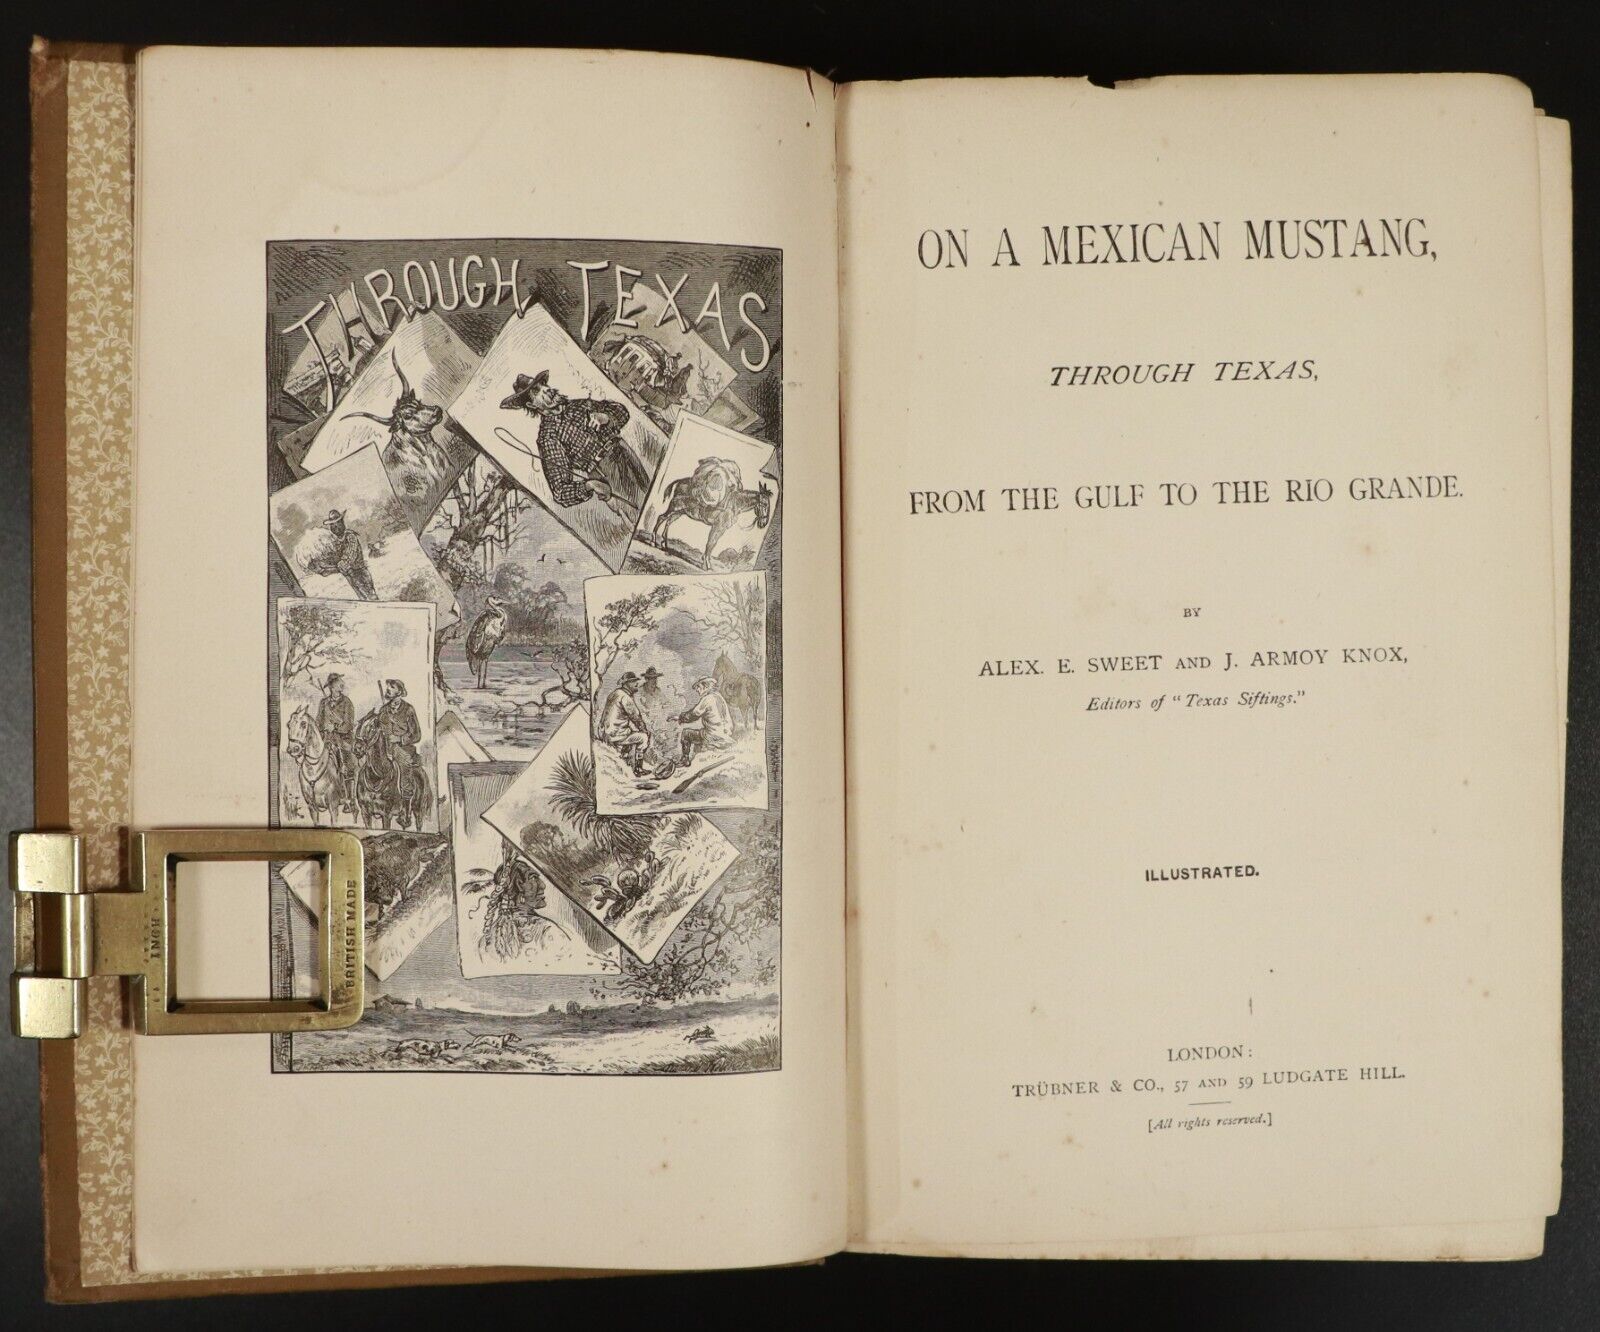 1883 On A Mexican Mustang by Alex E. Sweet Antique American Fiction Book 1st UK - 0